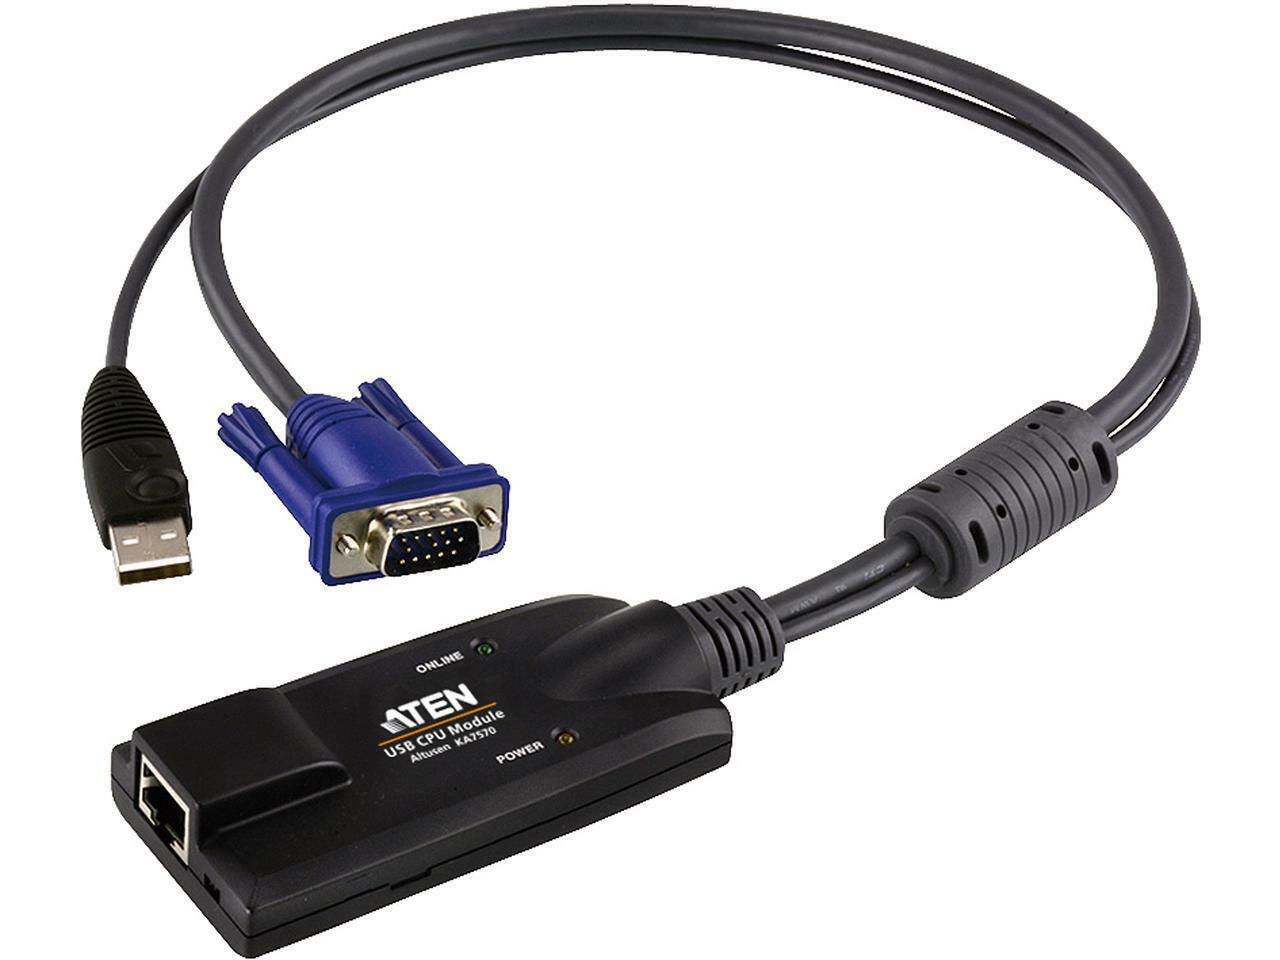 ATEN See Product Details USB KVM Adapter Cable (CPU Module) KA7570